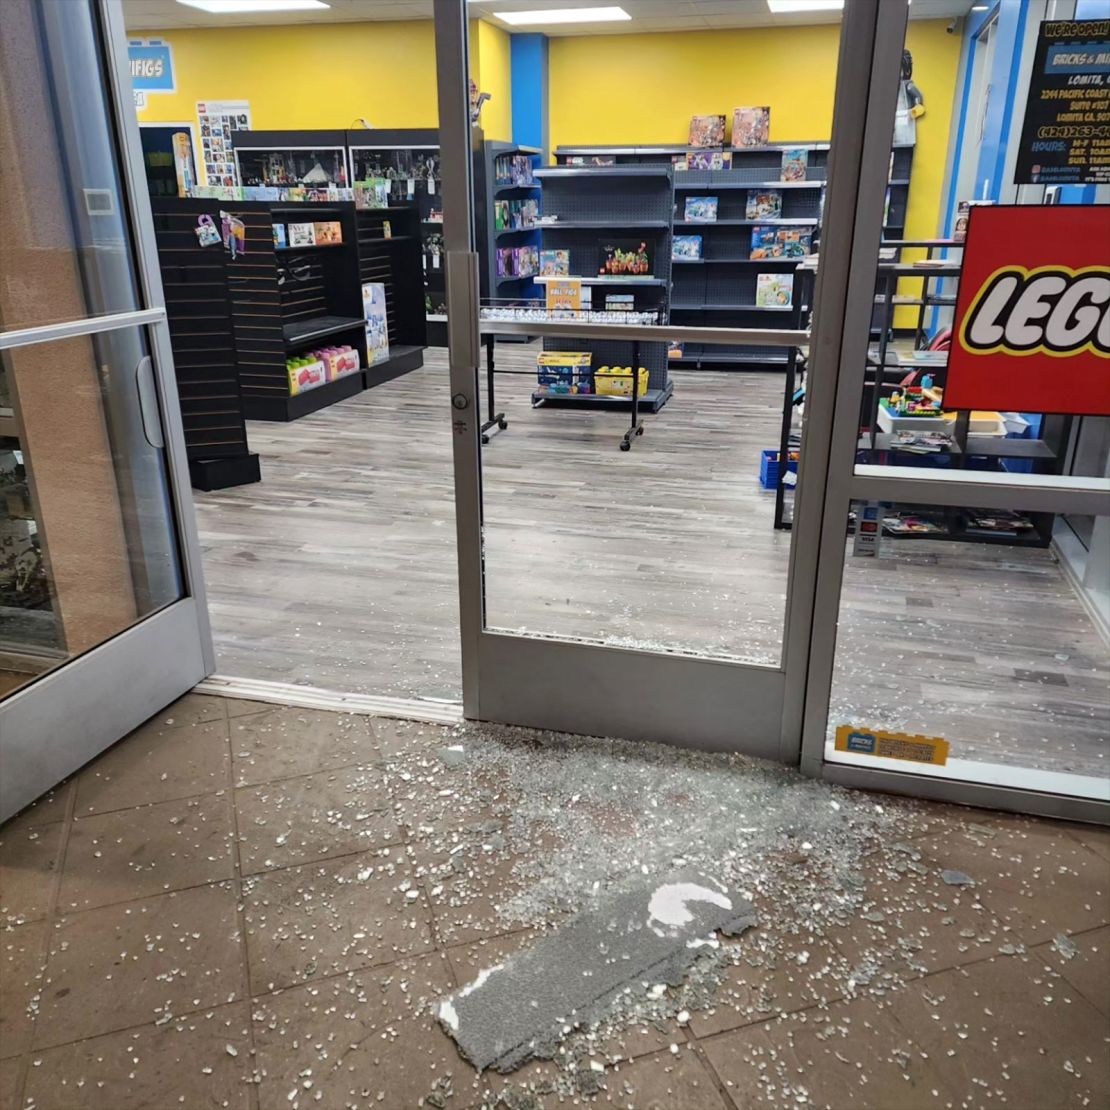 Robbers broke into Miguel Zuniga’s Bricks & Minifigs store in Lomita, California on June 18, and stole thousands of dollars worth of Lego products.